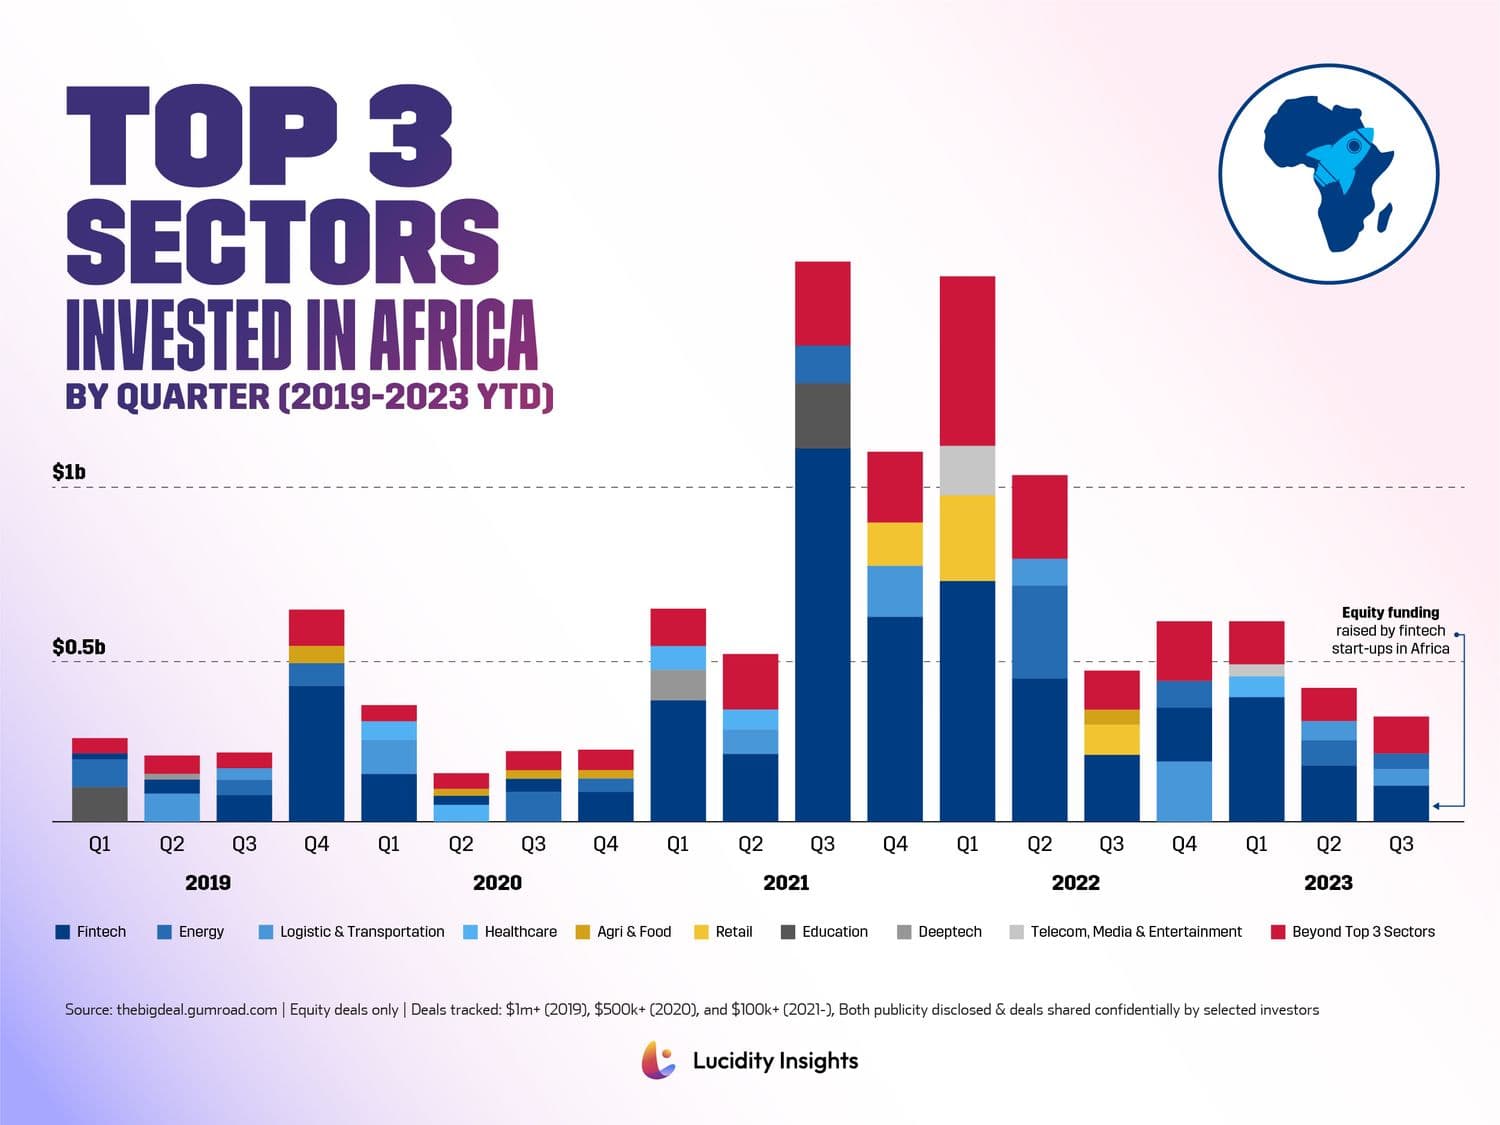 Top 3 Sectors Invested in Africa, by Quarter (2019-2023 YTD)